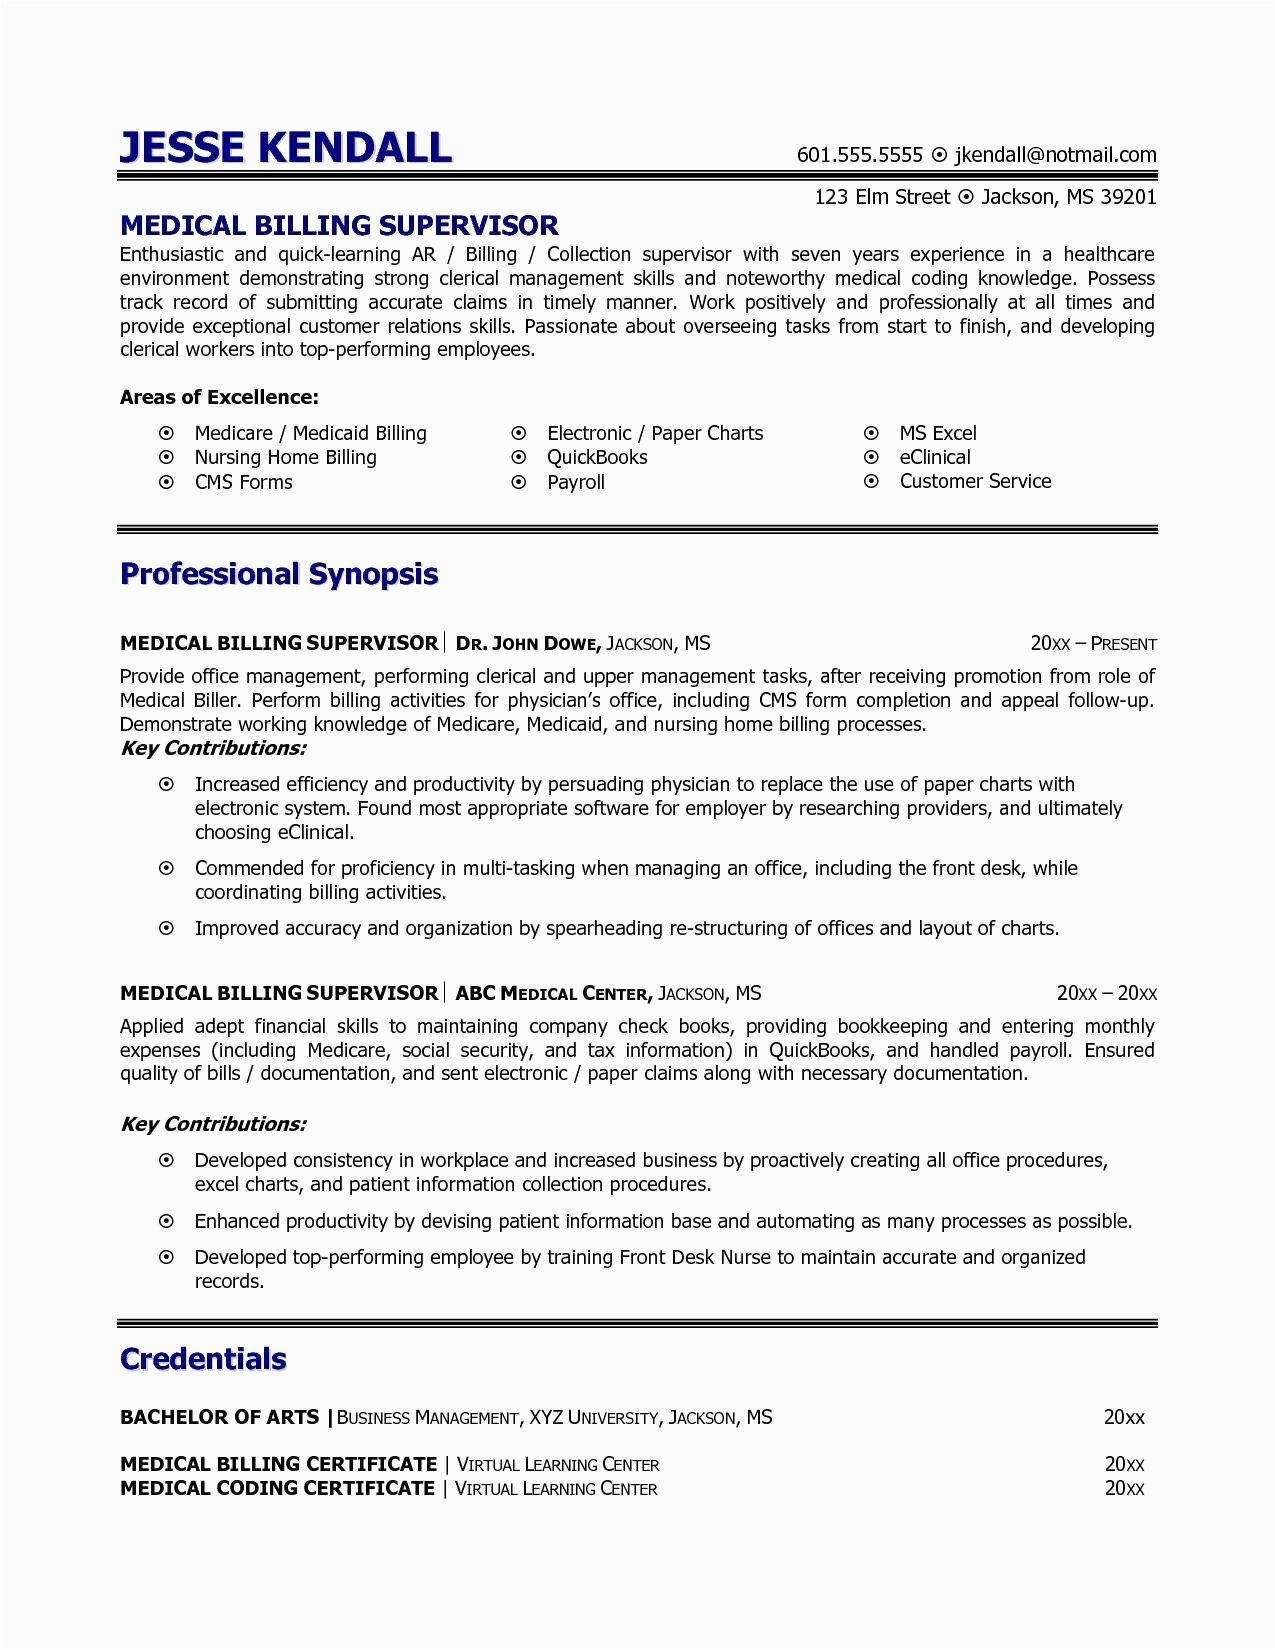 Healthcare Billing and Coding Resume Samples 23 Medical Coding Resume Example In 2020